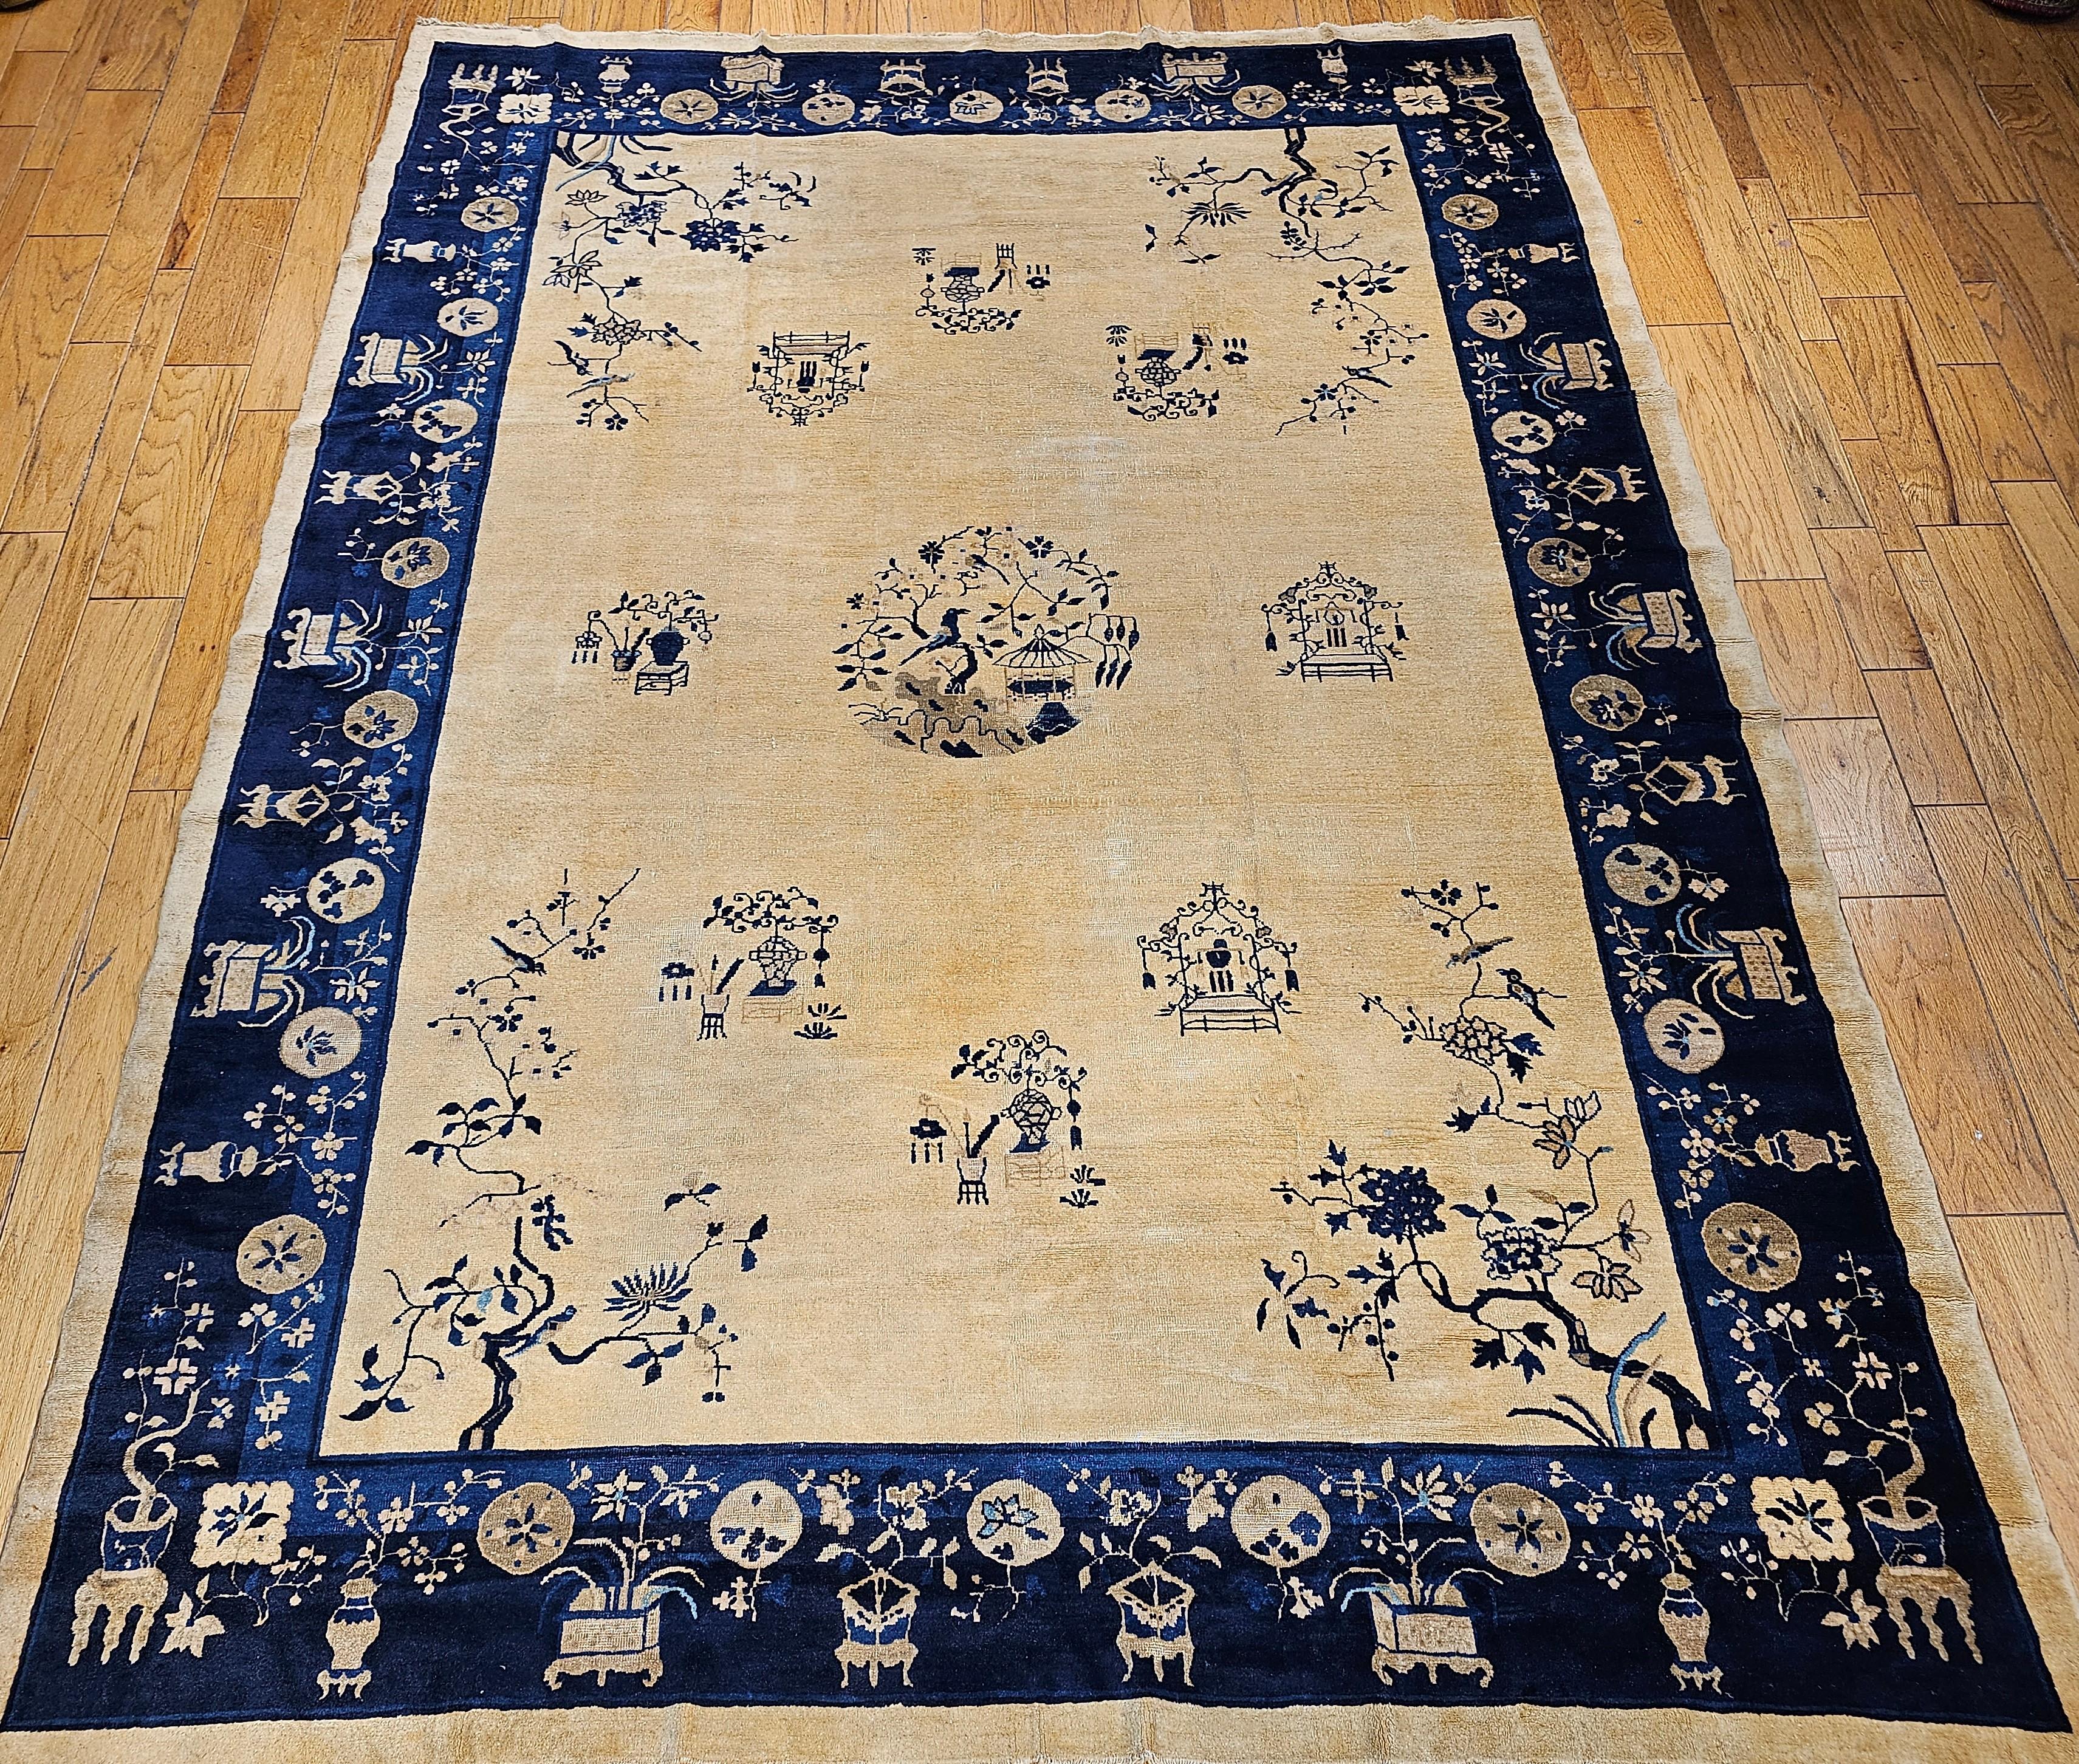 Vintage Chinese Peking room size rug from the late 1800s,  The rug has a pale yellow or tan main field color and a navy and French  blue color on the border. The design of the trees, branches, planters, and birds in the corners and throughout the